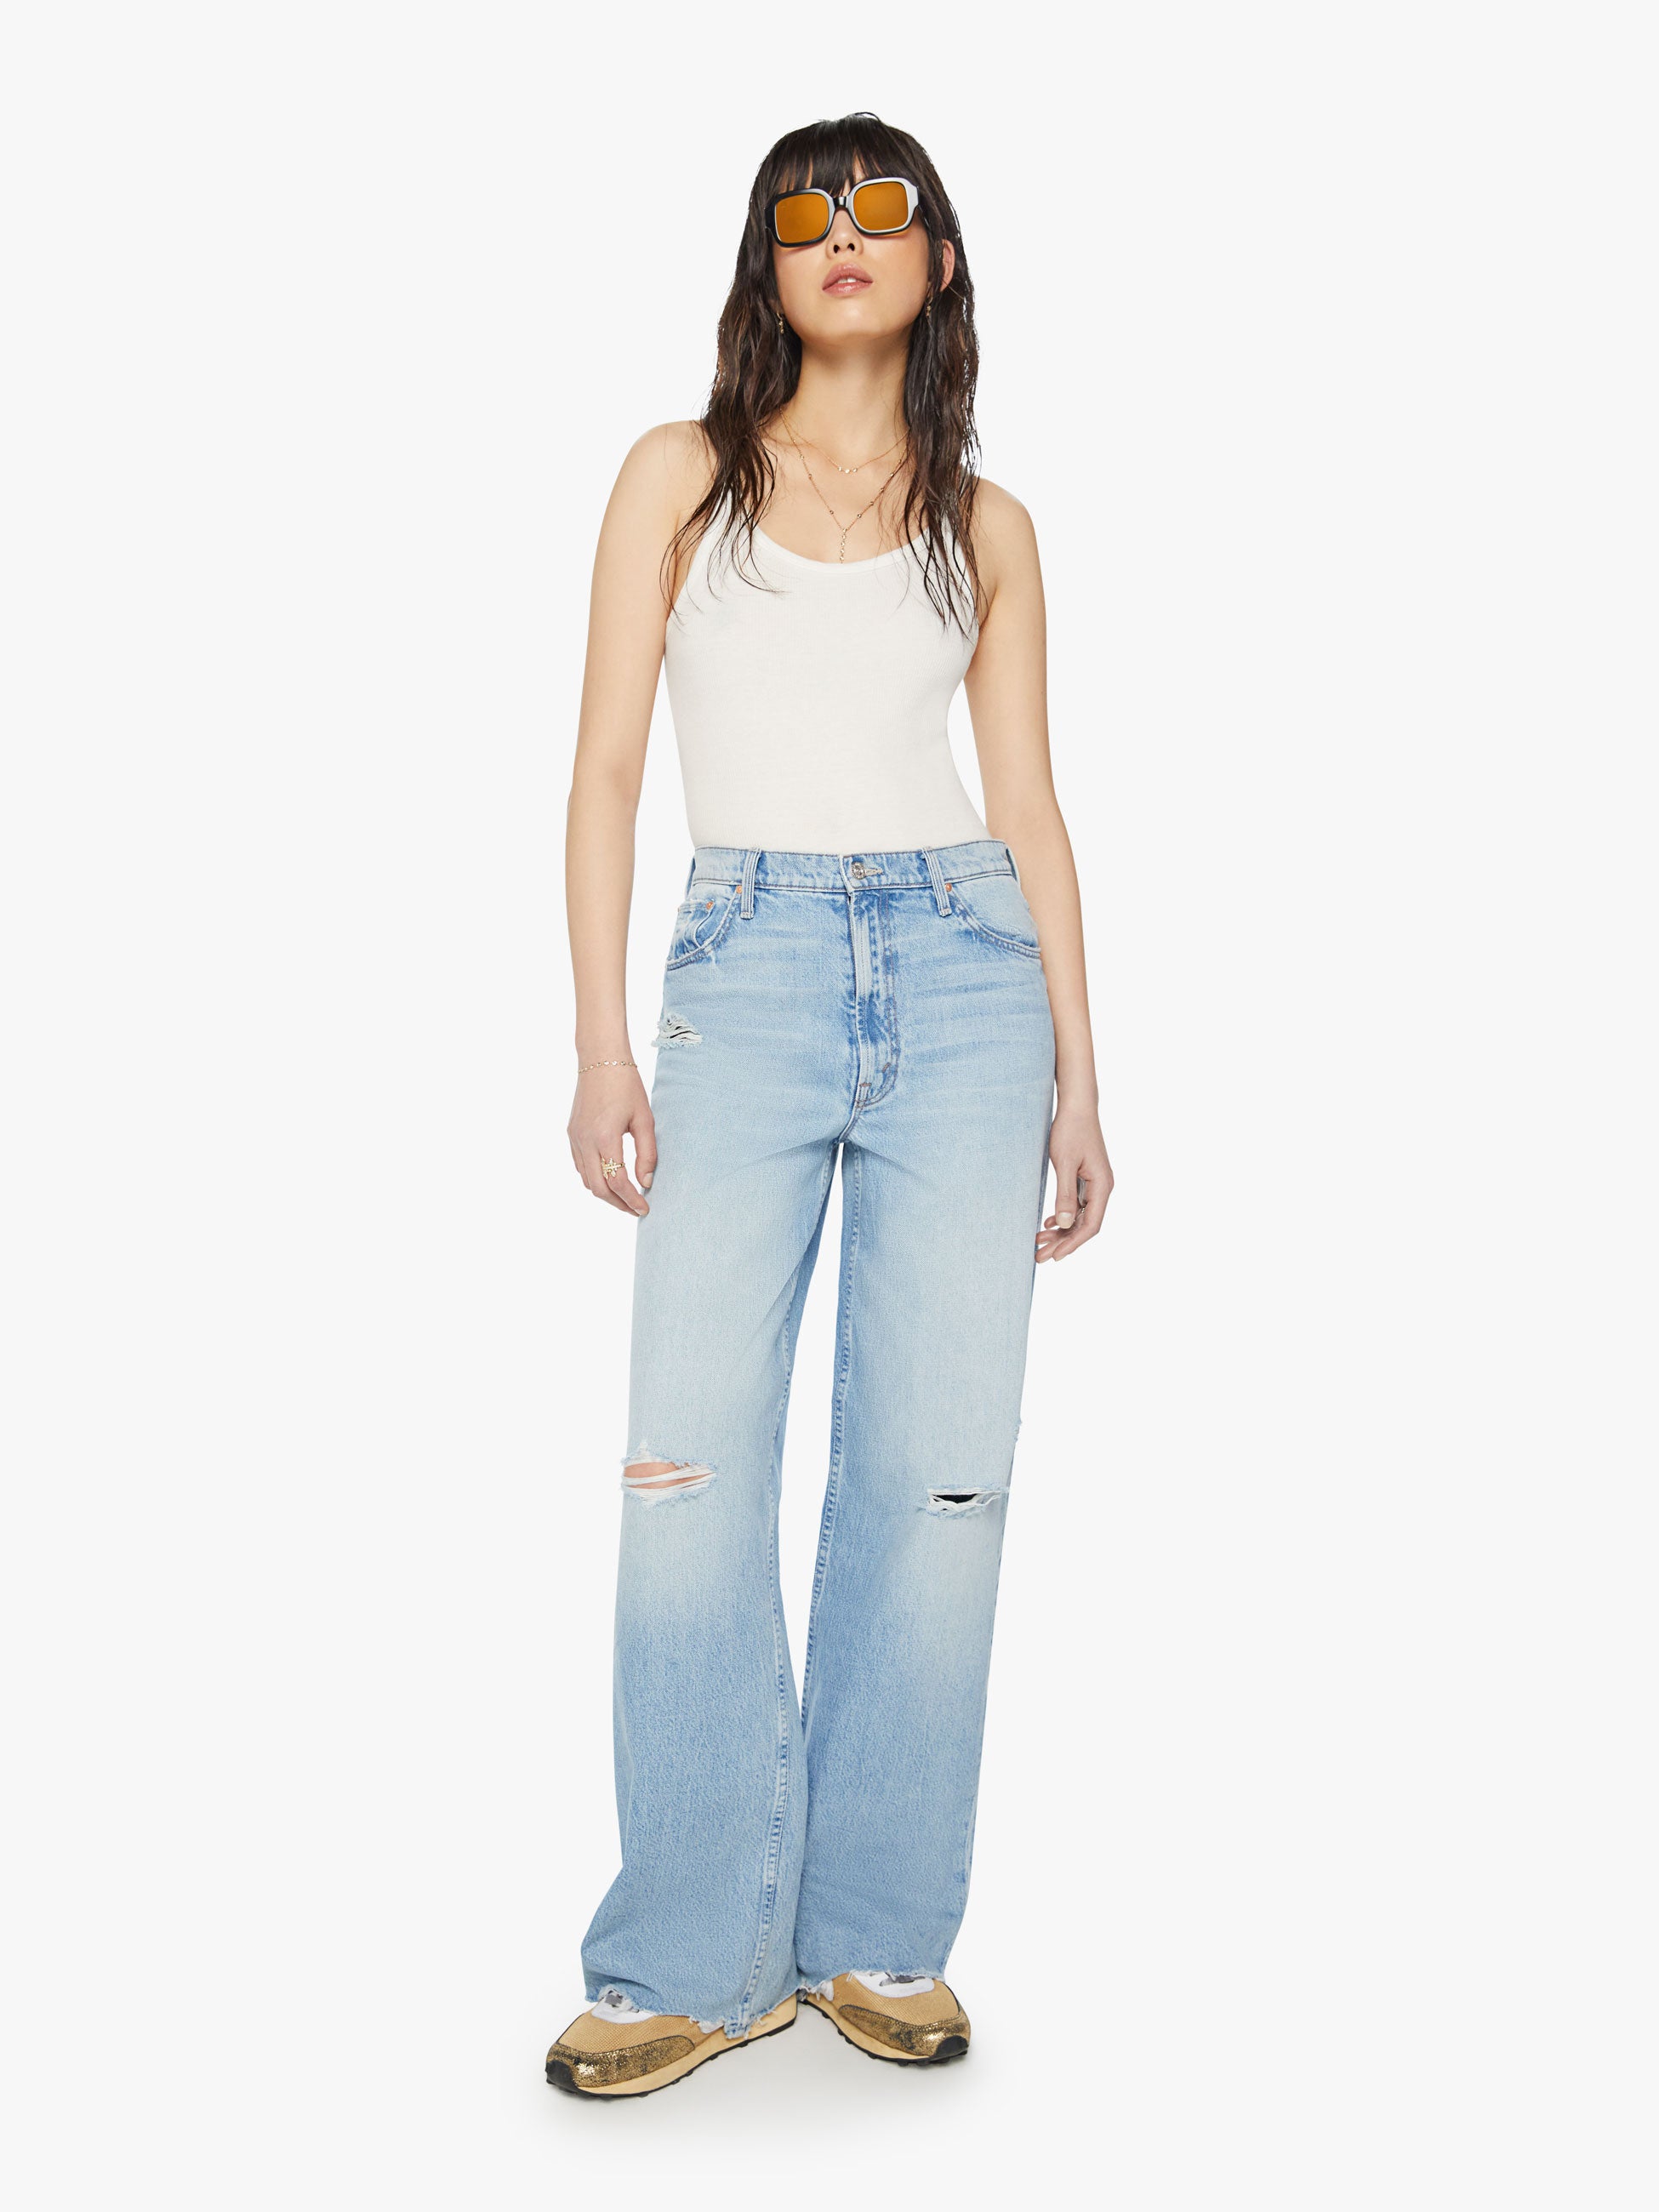 D.Jeans Recycled Denim High Waist Ankle Woman's Blue Jeans